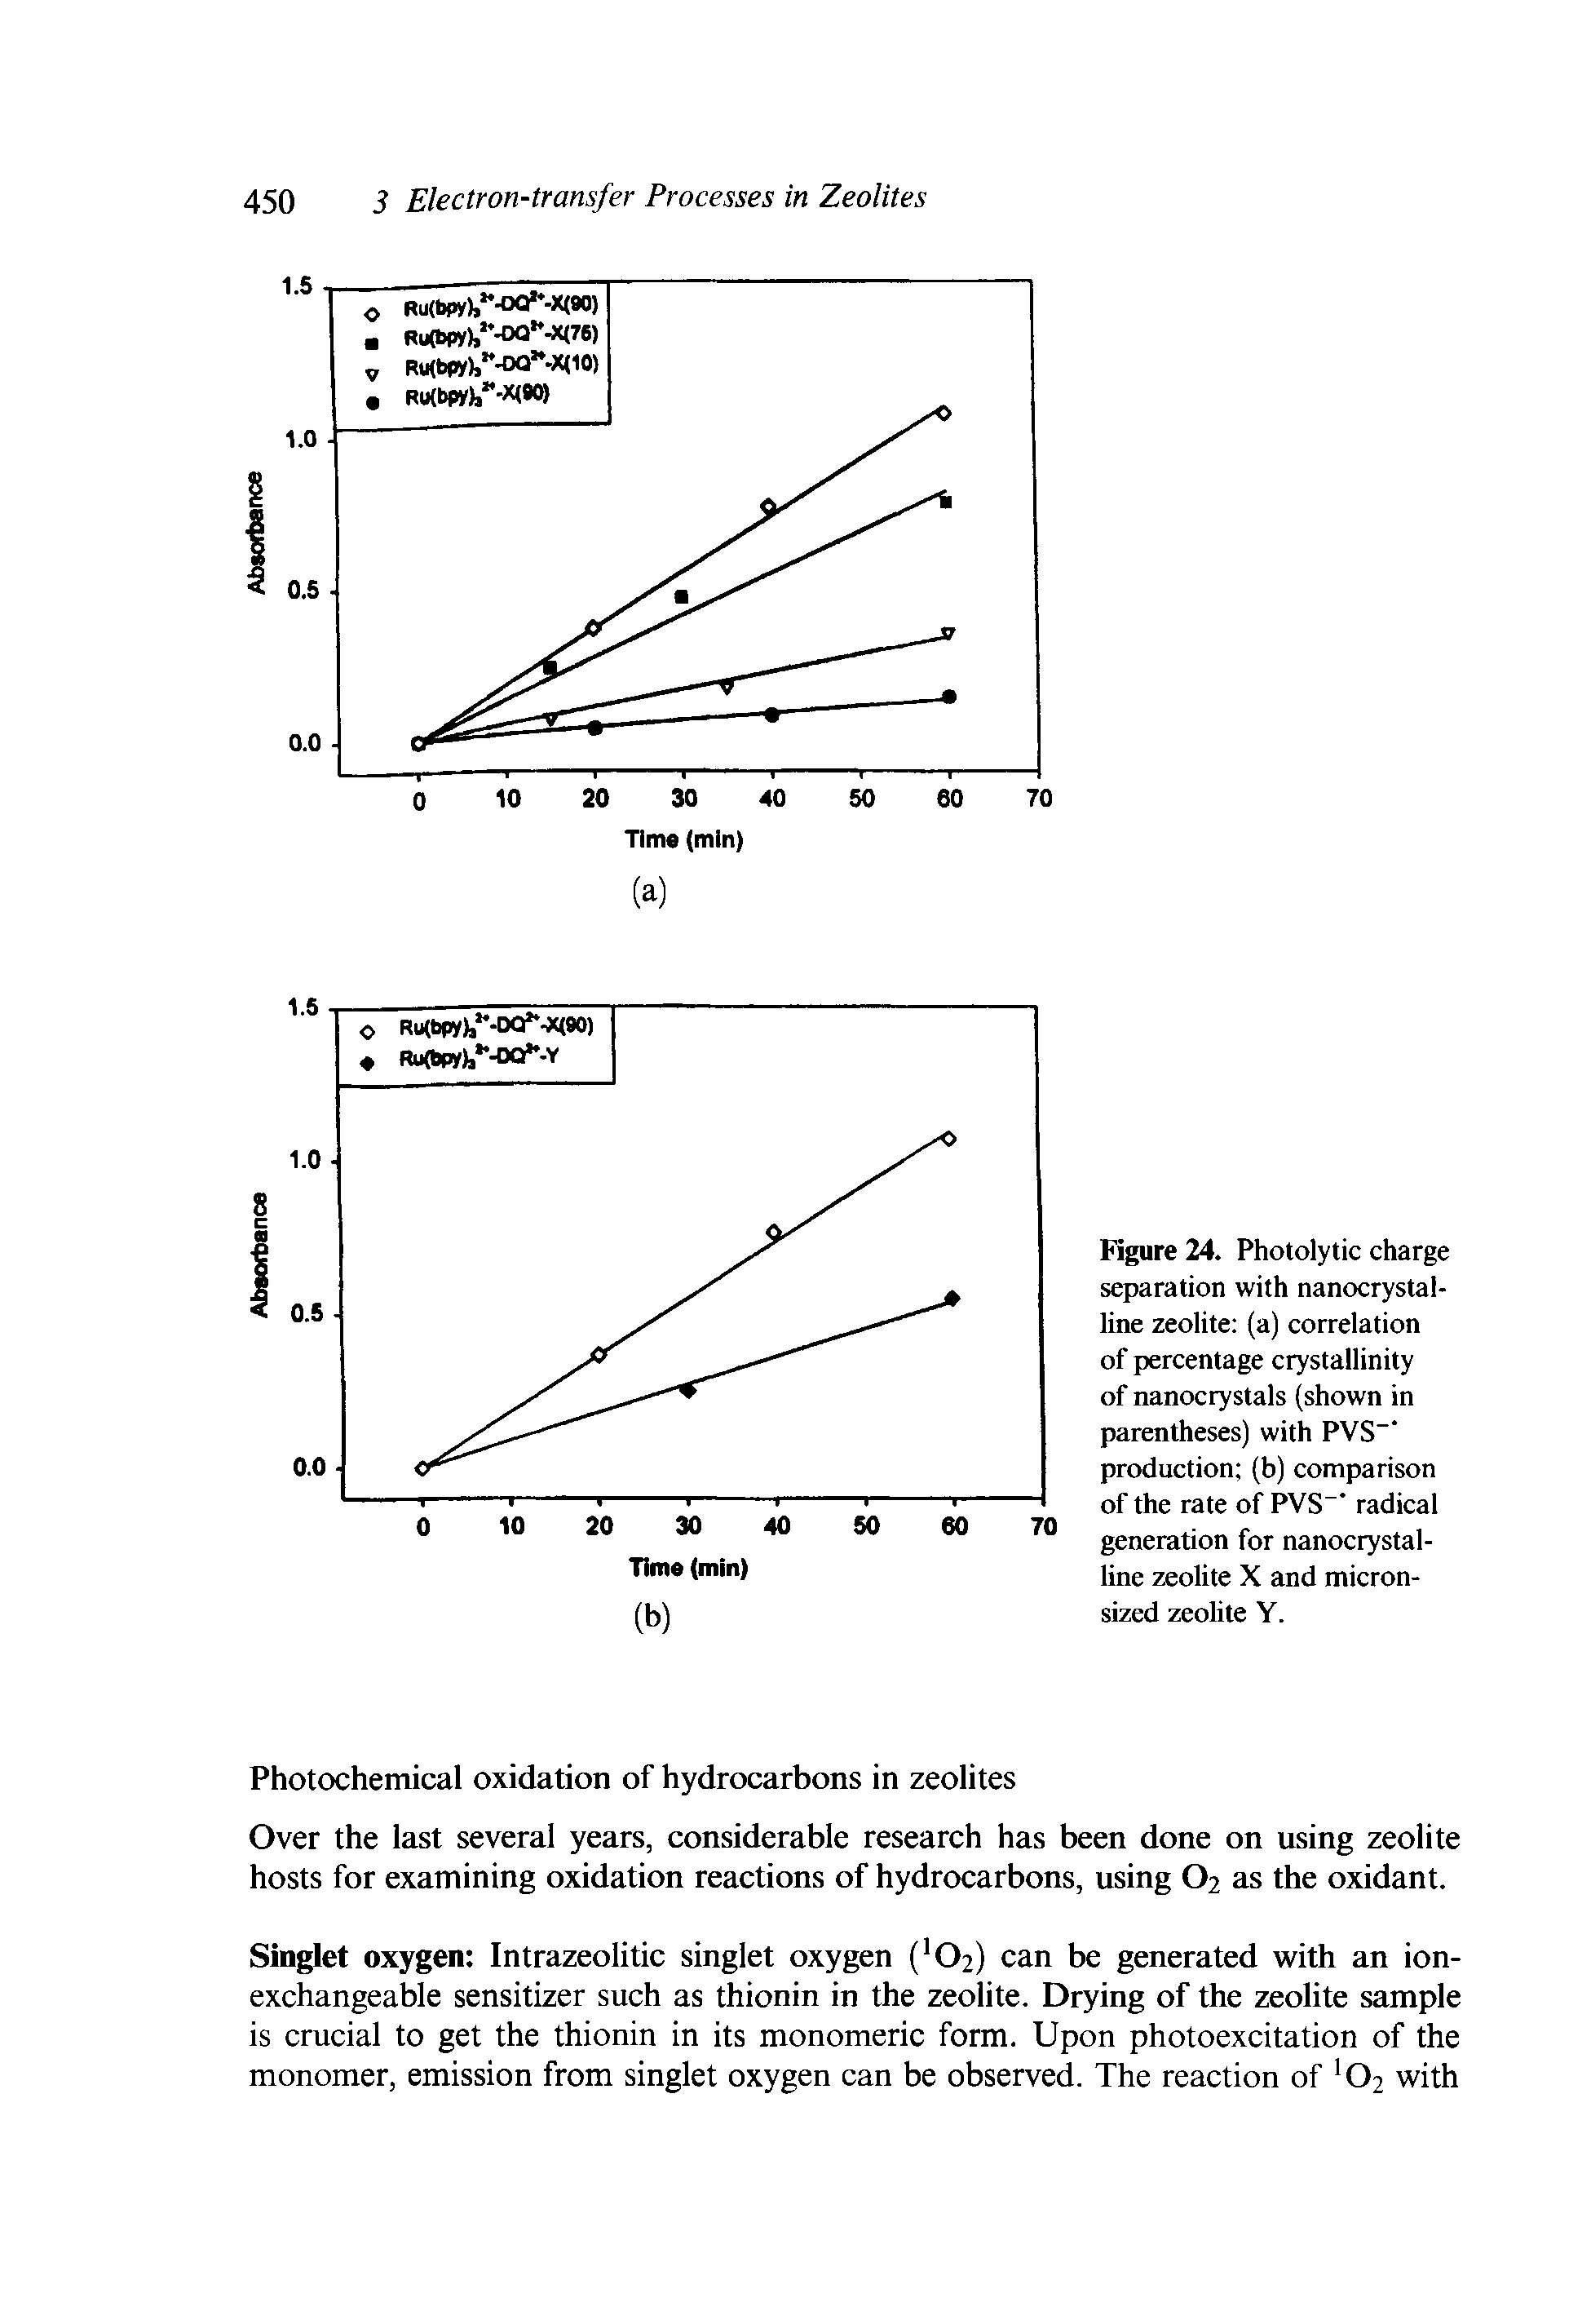 Figure 24. Photolytic charge separation with nanocrystalline zeolite (a) correlation of percentage crystallinity of nanocrystals (shown in parentheses) with PVS" production (b) comparison of the rate of PVS " radical generation for nanocrystalline zeolite X and micronsized zeolite Y.